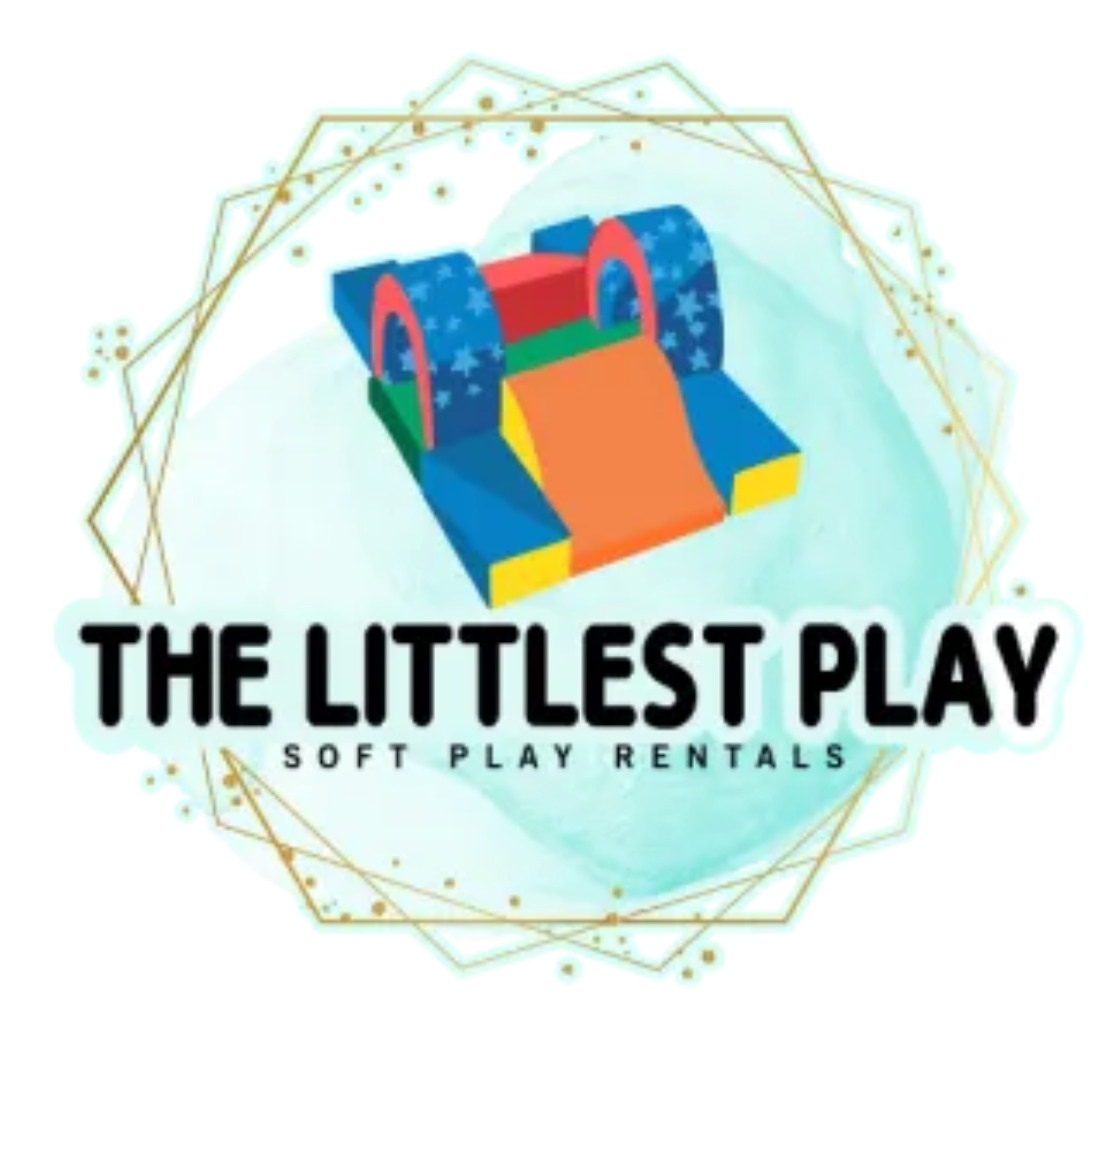 a logo for the littlest play soft play rentals